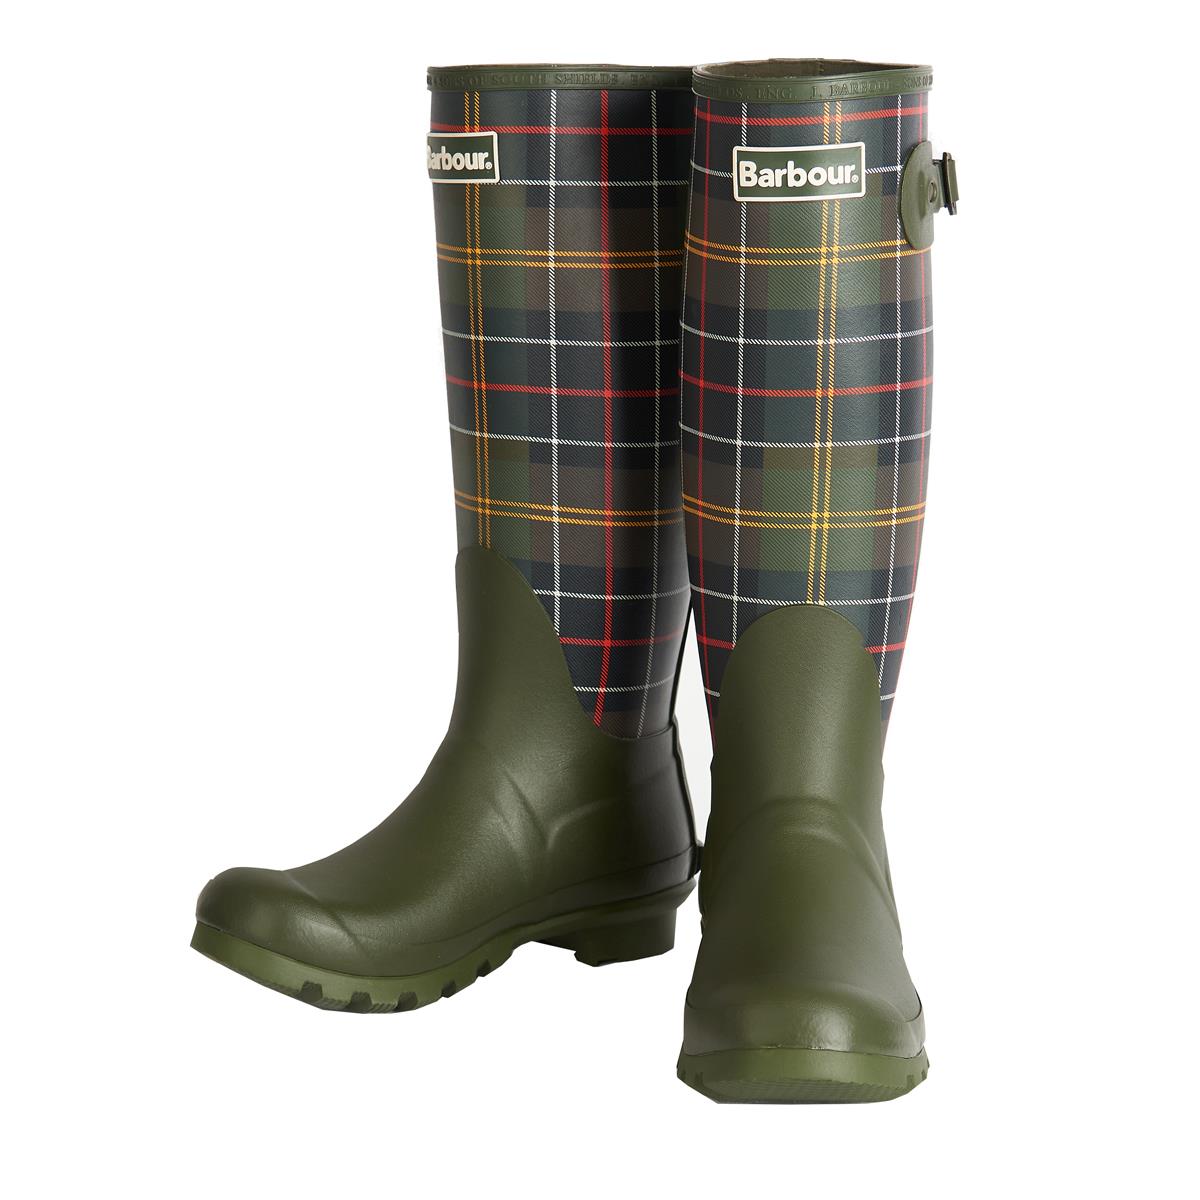 Barbour Womens Tartan Bede Wellingtons Questions & Answers